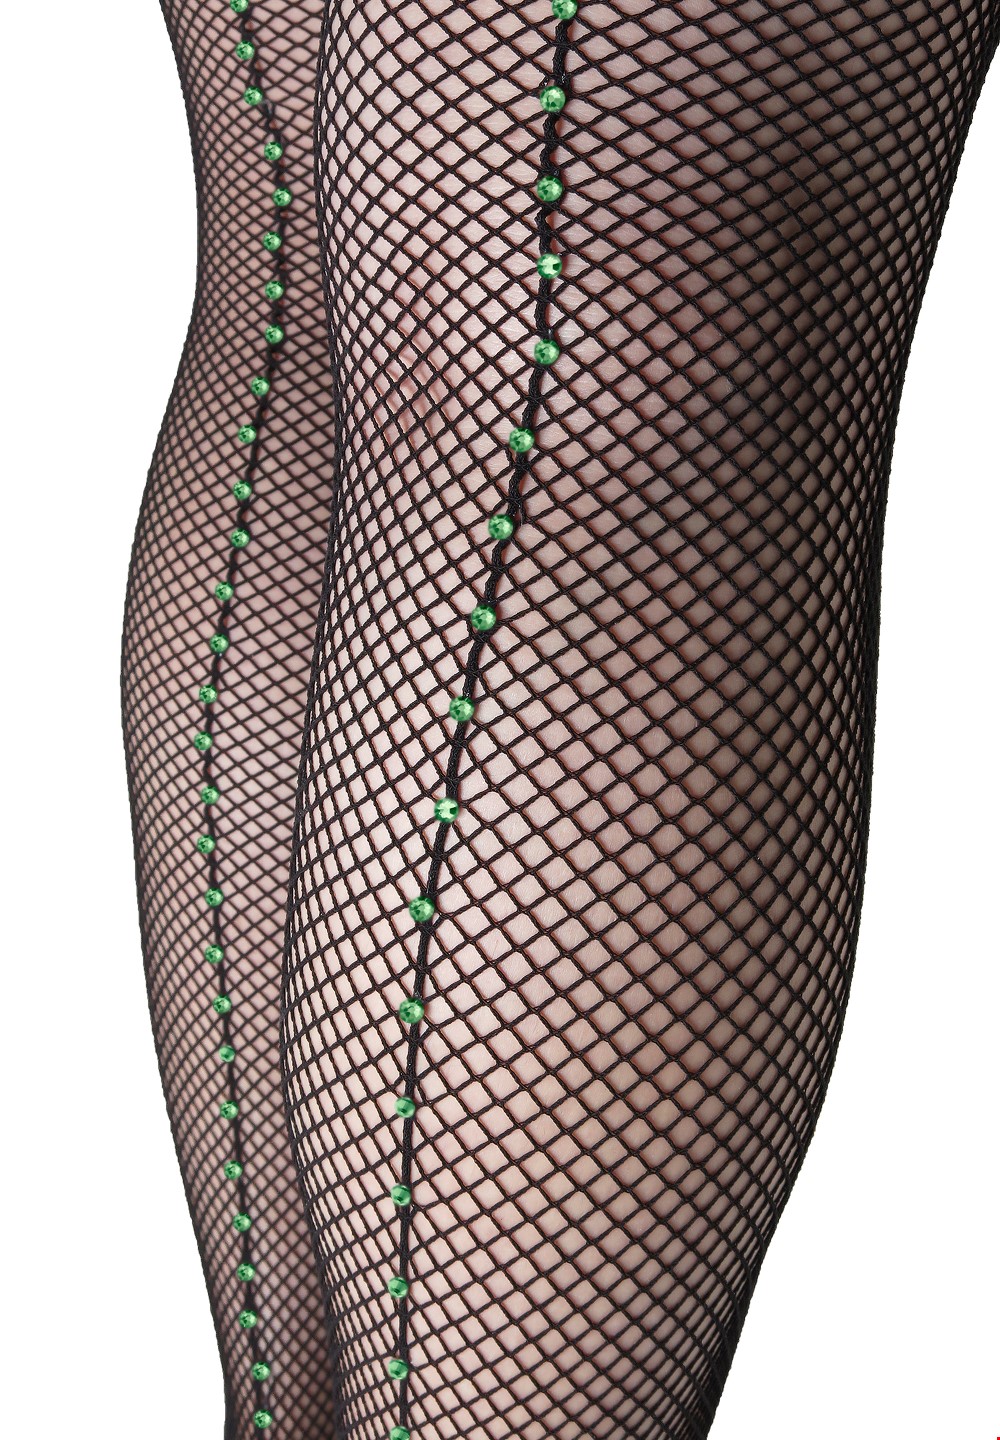 Rhinestone, AB Crystal Sheer, Nude Glitter Tights for Performers and  Festival We